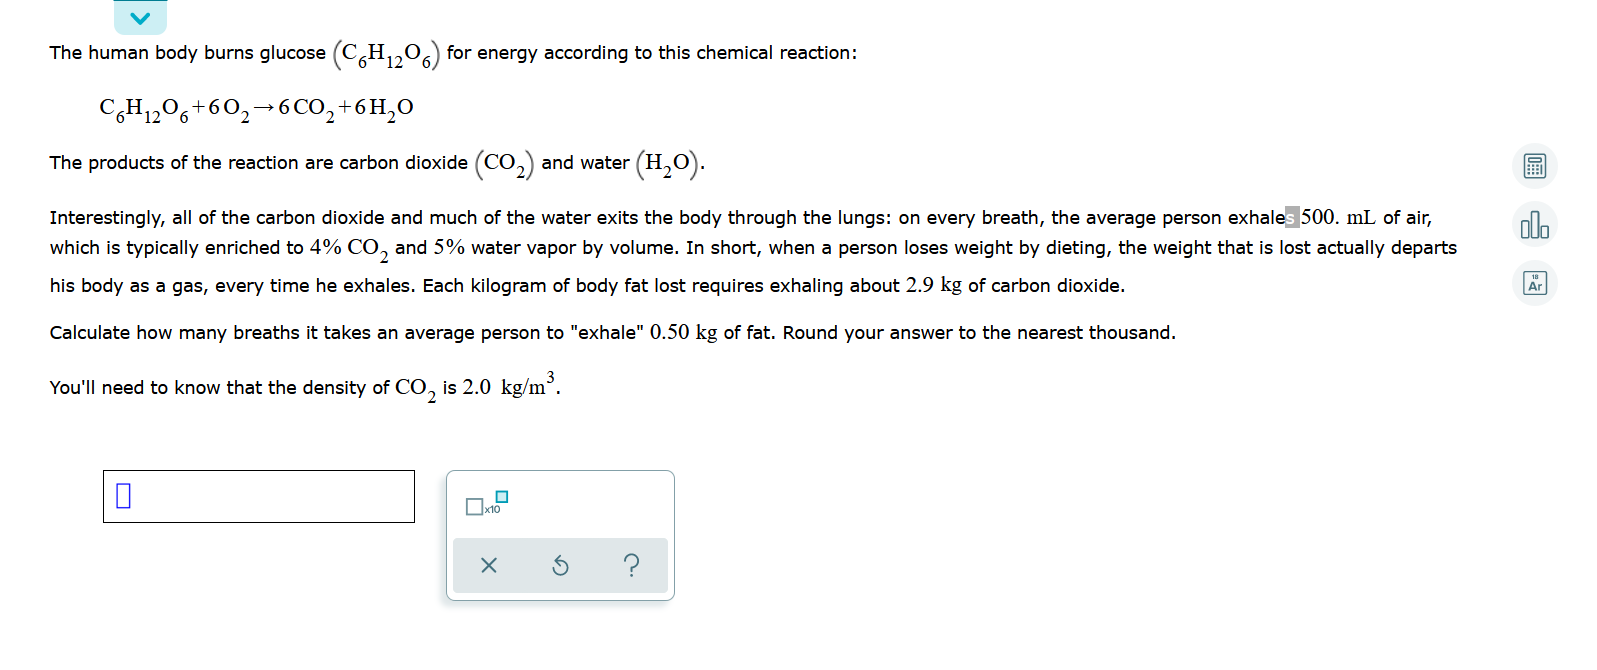 The human body burns glucose (C,H,,0,) for energy according to this chemical reaction:
C,H1206+60,→6 CO,+6H,0
The products of the reaction are carbon dioxide (CO,) and water (H,0).
interestingly, all of the carbon dioxide and much of the water exits the body through the lungs: on every breath, the average person exhales 500. mL of air,
which is typically enriched to 4% CO, and 5% water vapor by volume. In short, when a person loses weight by dieting, the weight that is lost actually departs
his body as a gas, every time he exhales. Each kilogram of body fat lost requires exhaling about 2.9 kg of carbon dioxide.
Calculate how many breaths it takes an average person to "exhale" 0.50 kg of fat. Round your answer to the nearest thousand.
(ou'll need to know that the density of CO, is 2.0 kg/m°.
